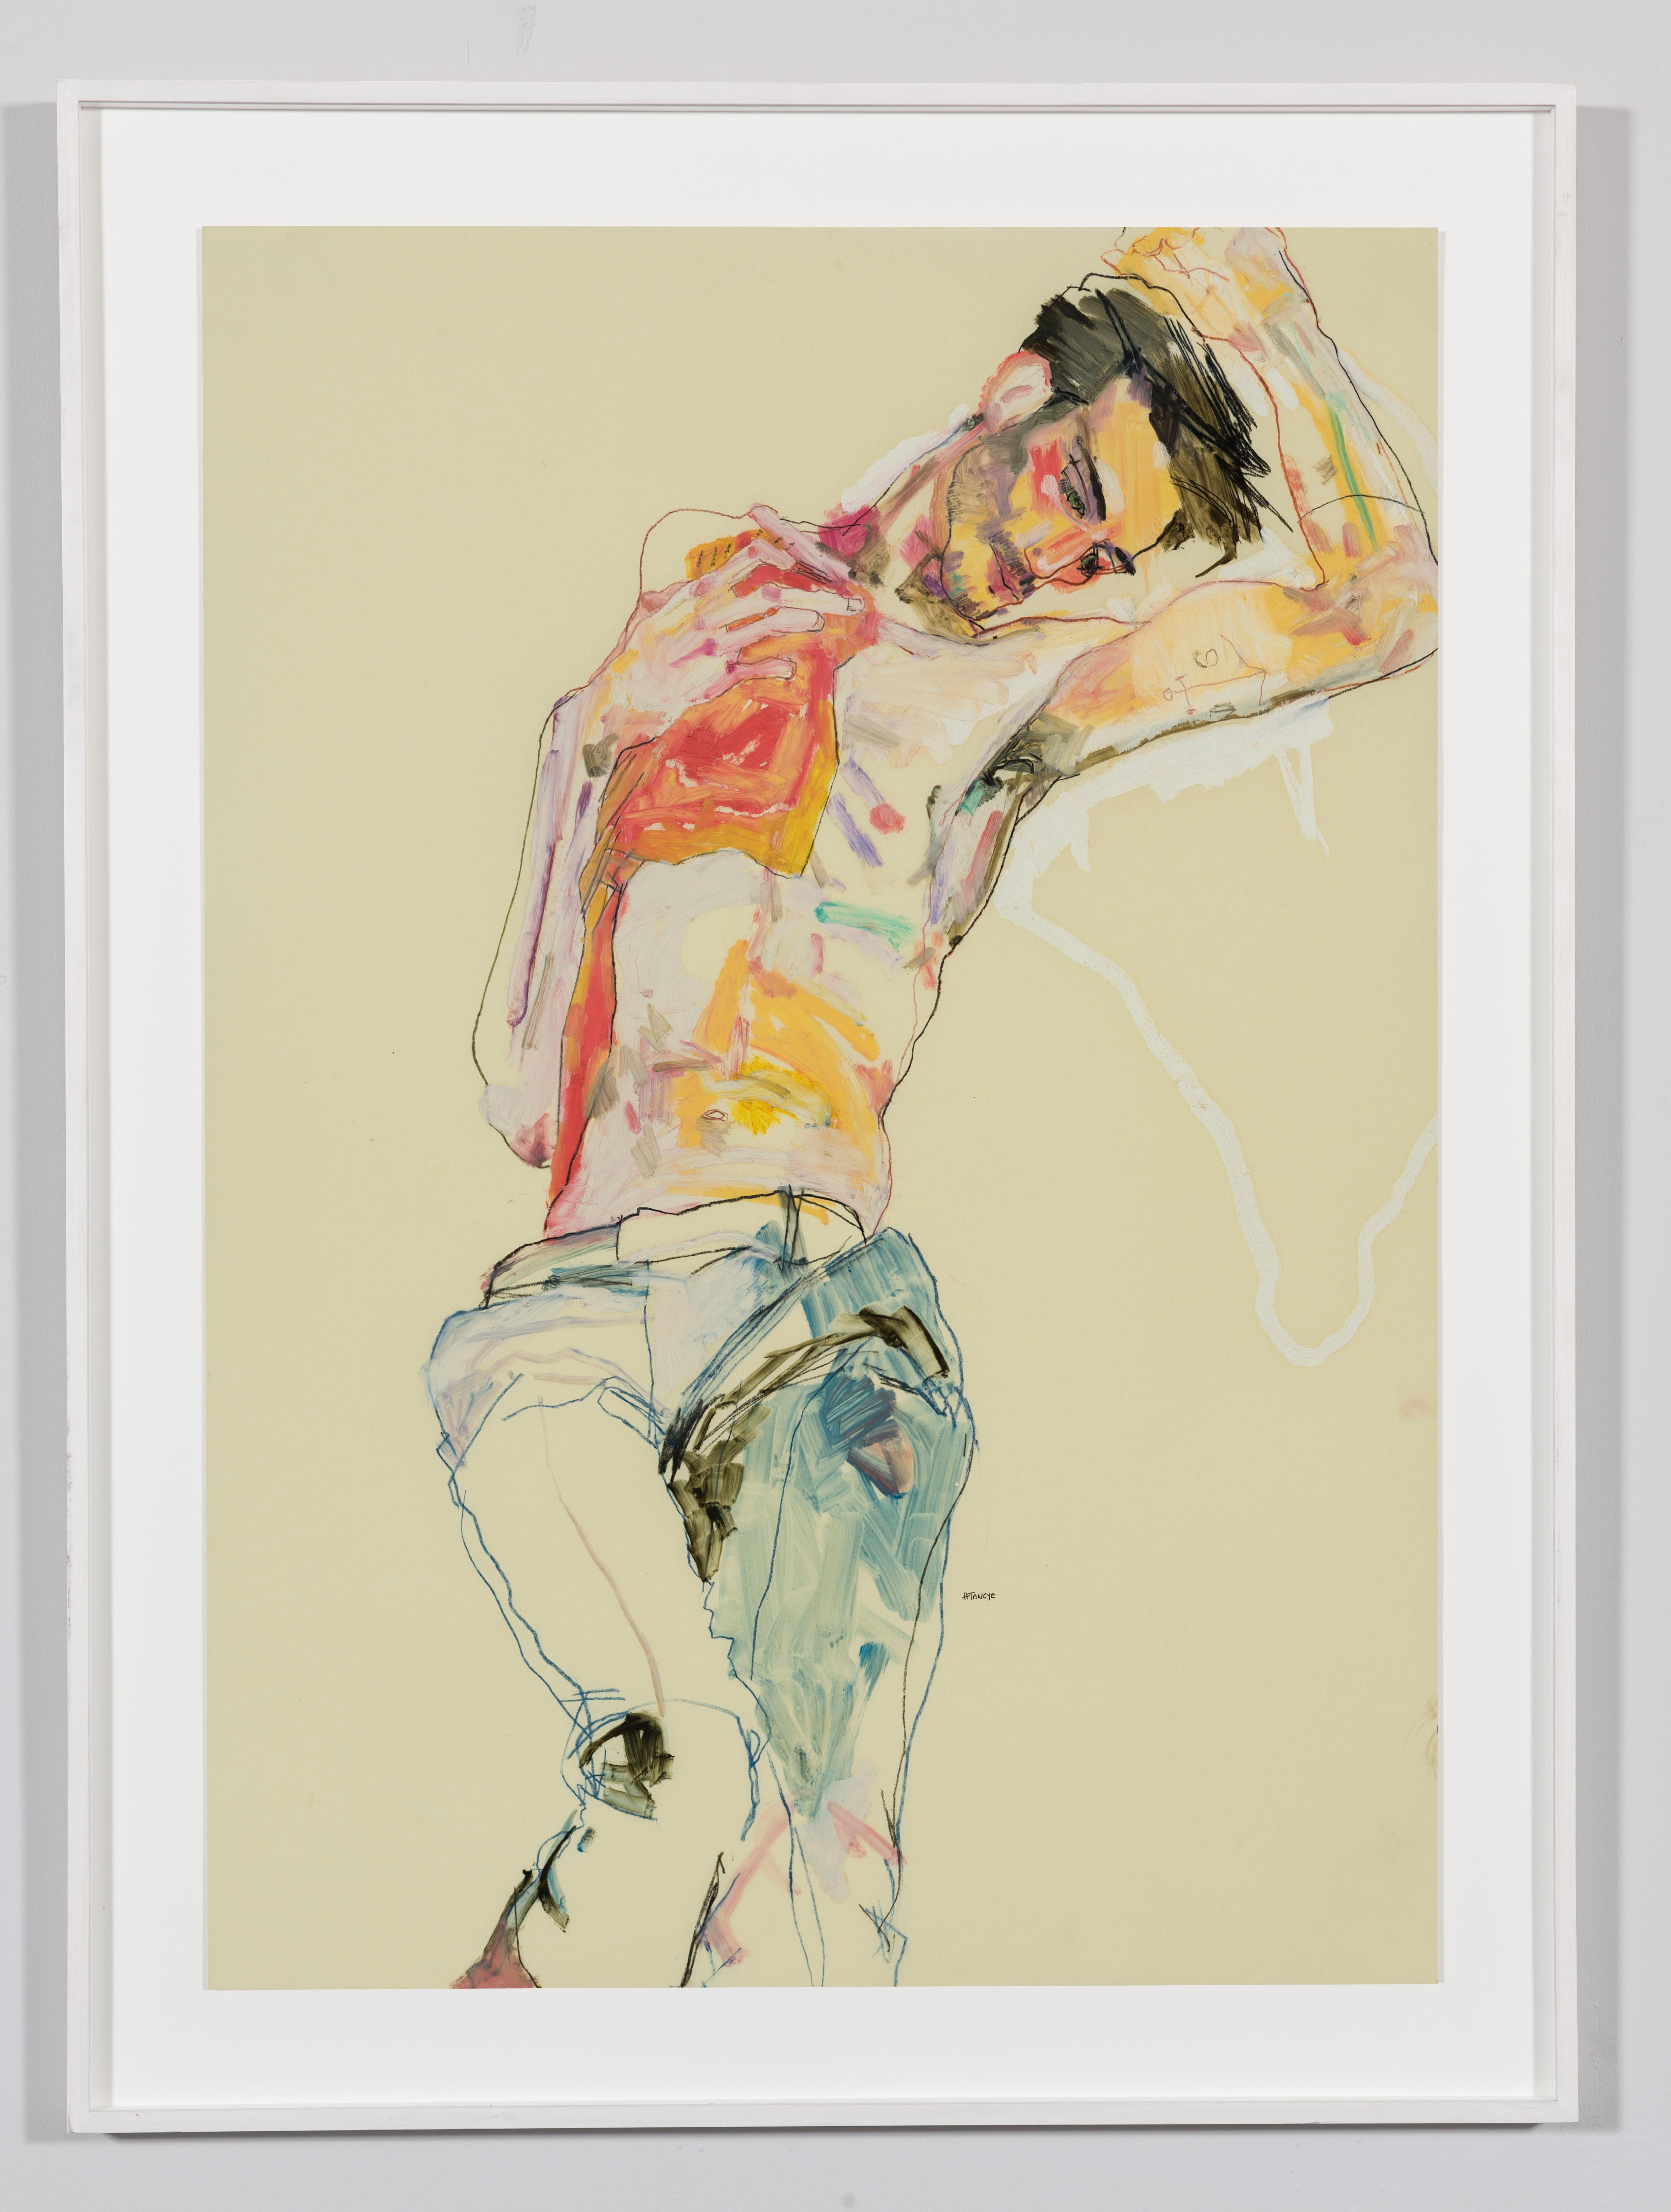 Francesco (Blue Trousers), Mixed media on Pergamenata parchment - Painting by Howard Tangye